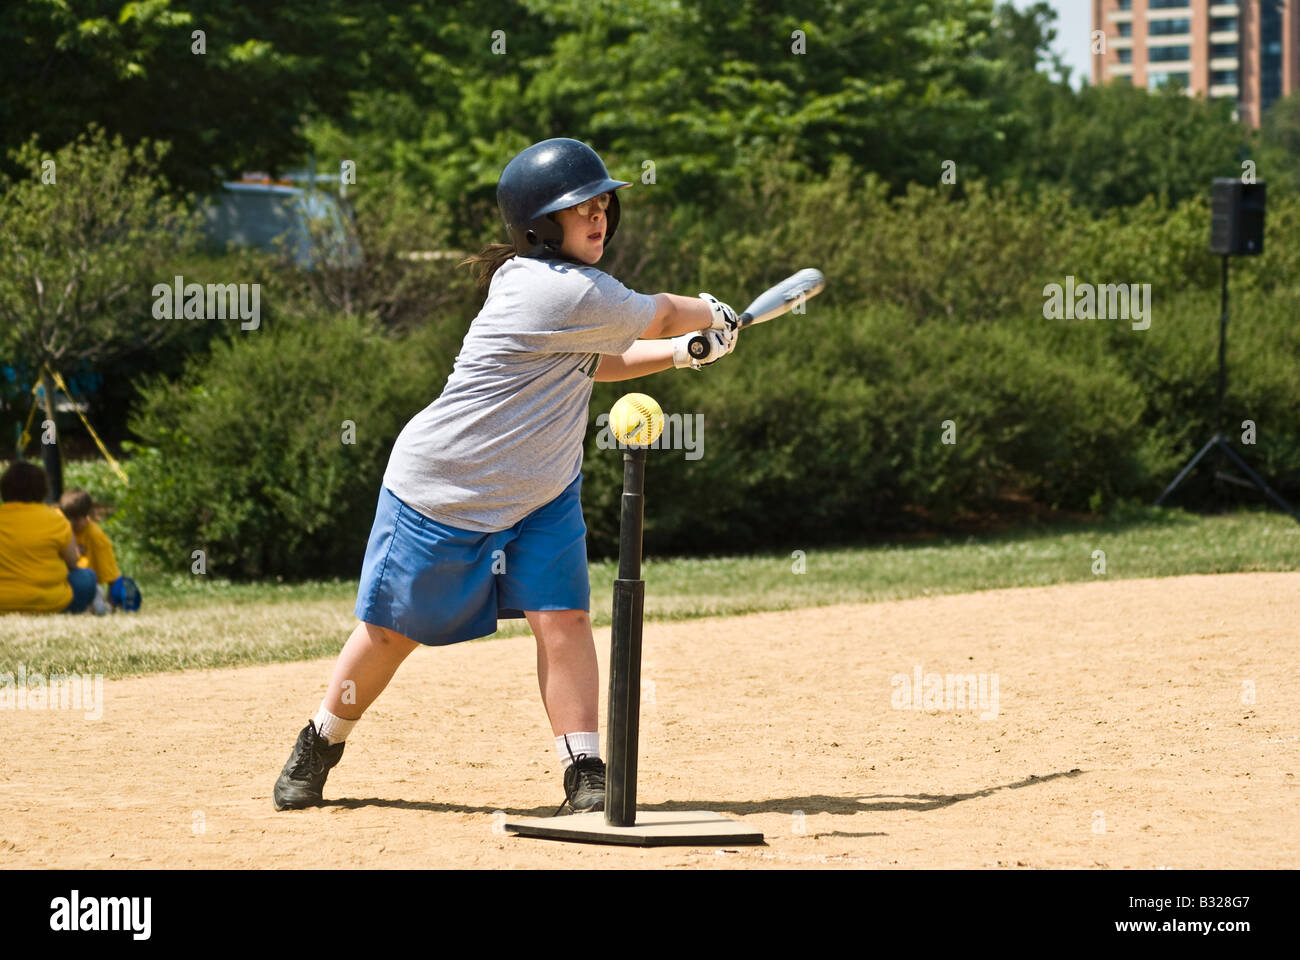 girl-at-a-special-olympics-softball-tournament-swings-and-misses-the-B328G7.jpg